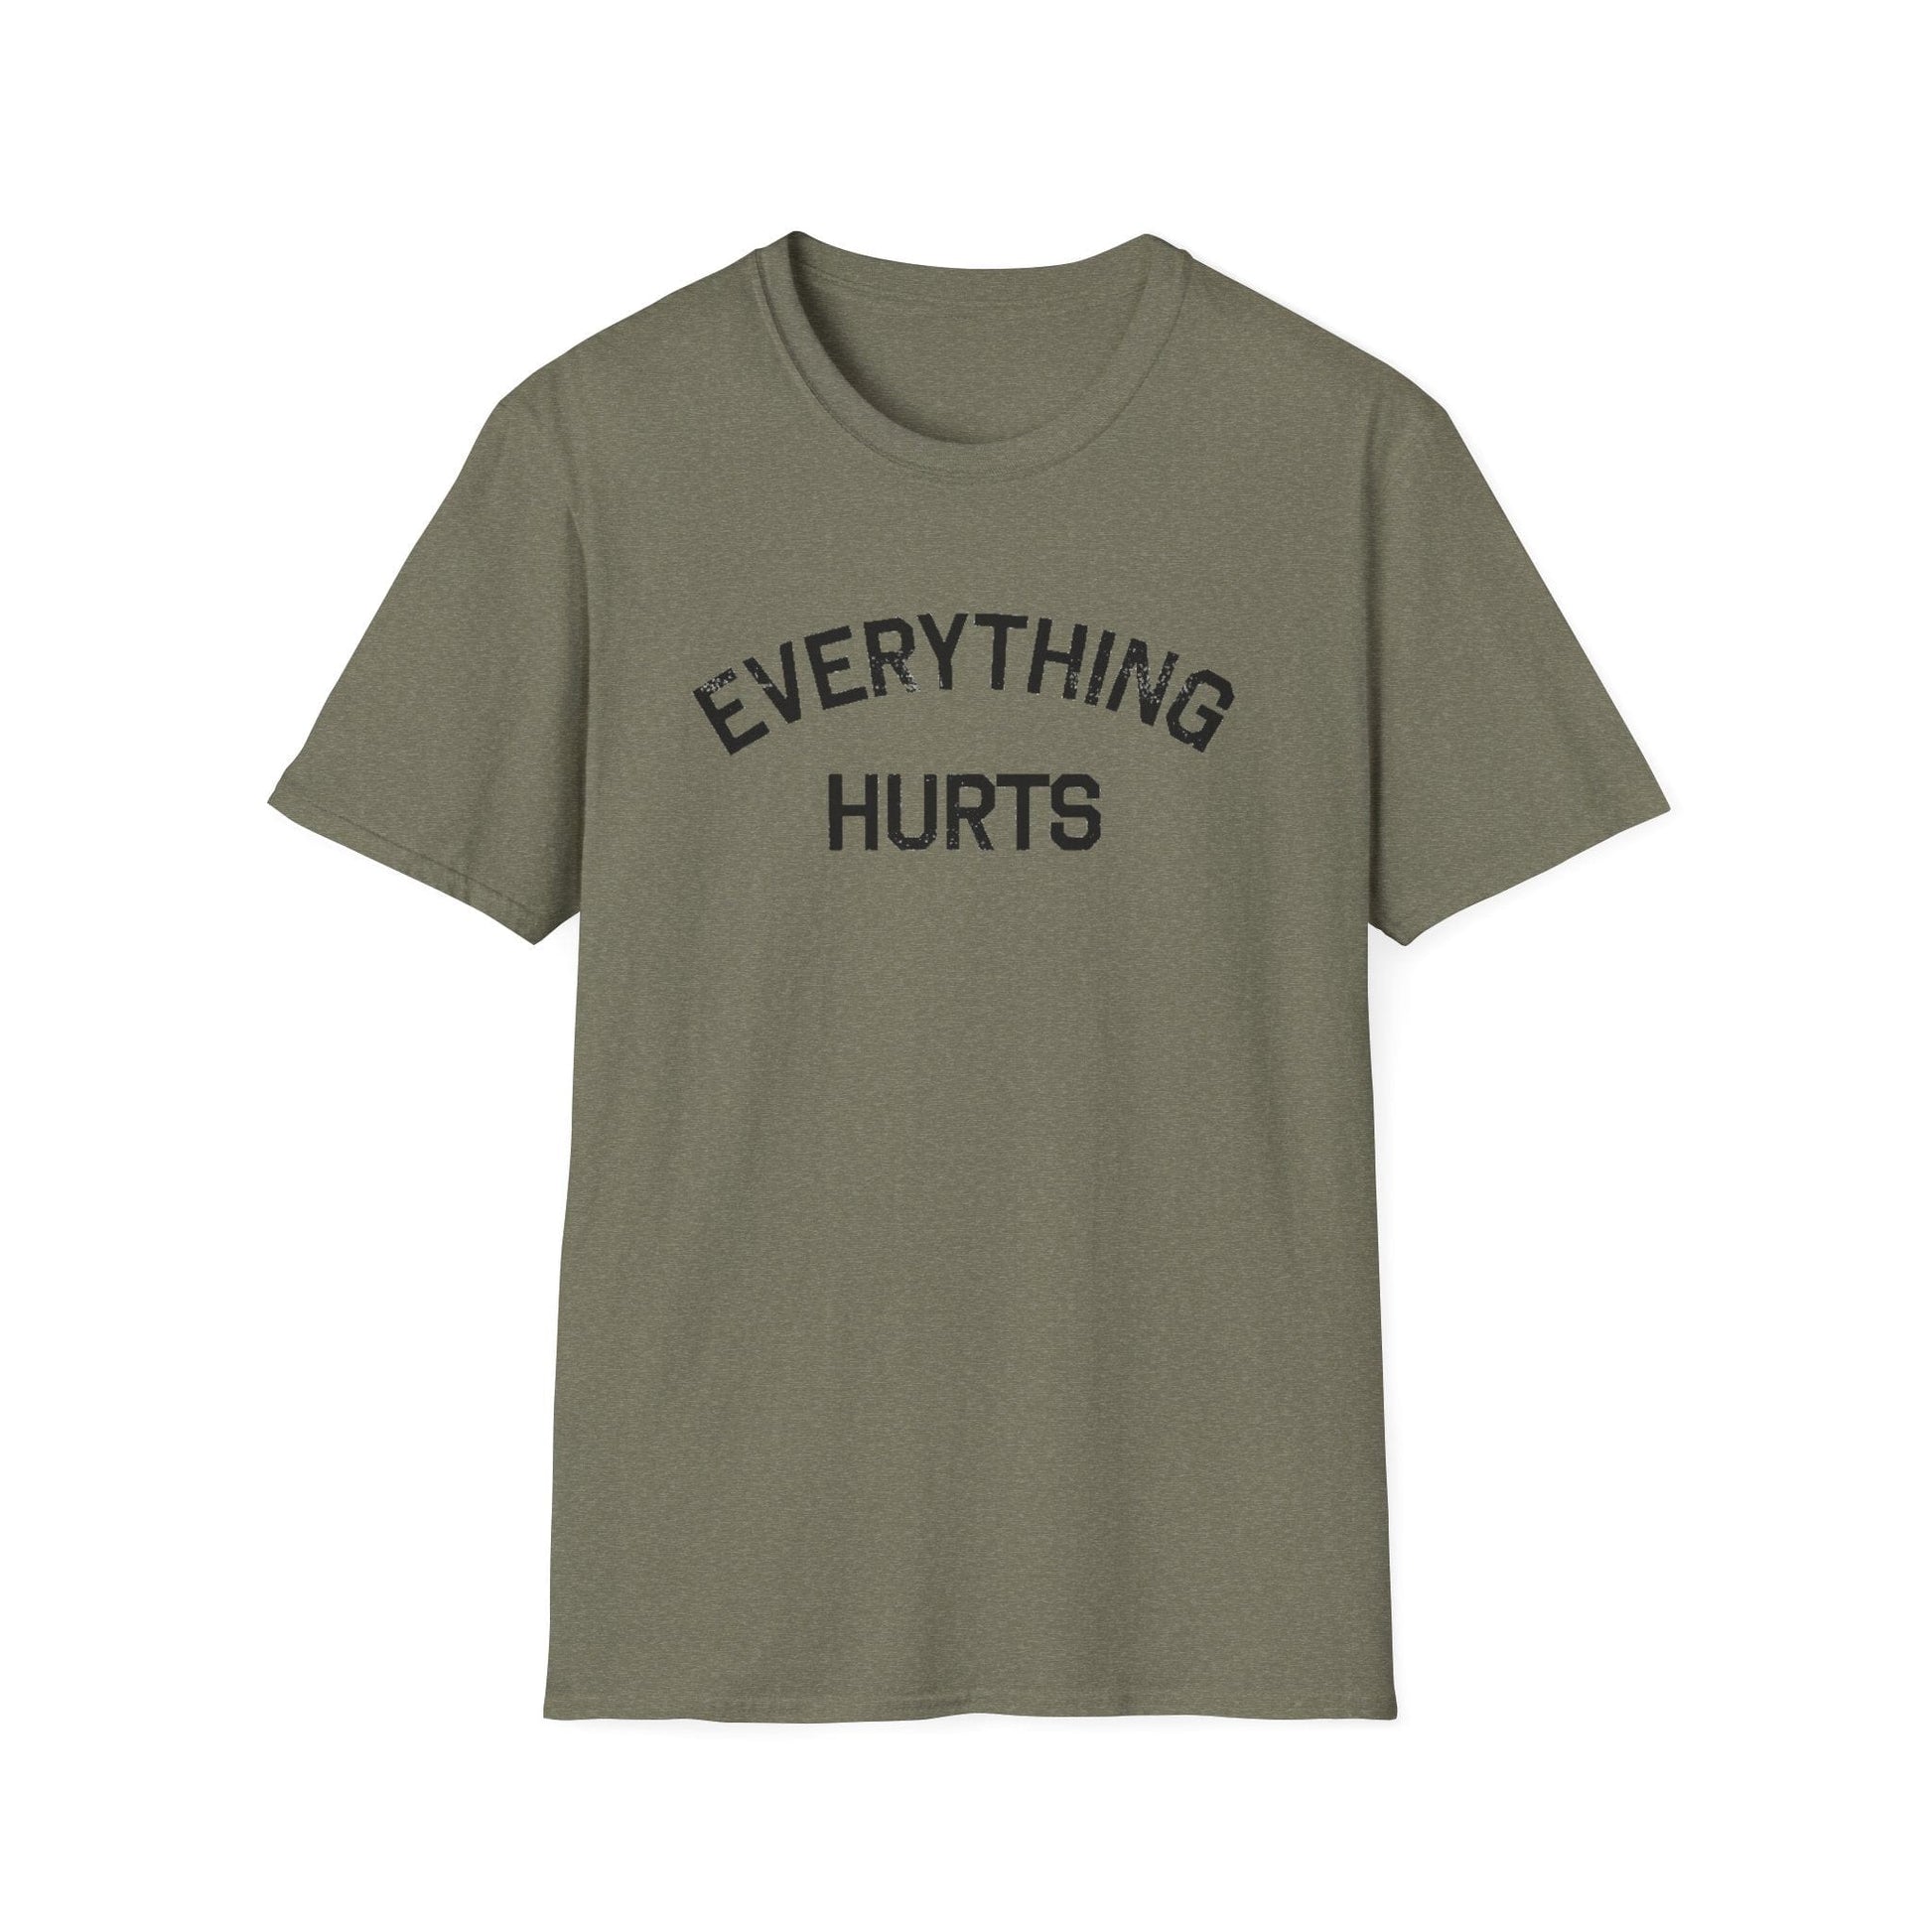 EVERYTHING HURTS SOFT STYLE T SHIRT T-Shirt Printify Heather Military Green / S 10338104640019085123